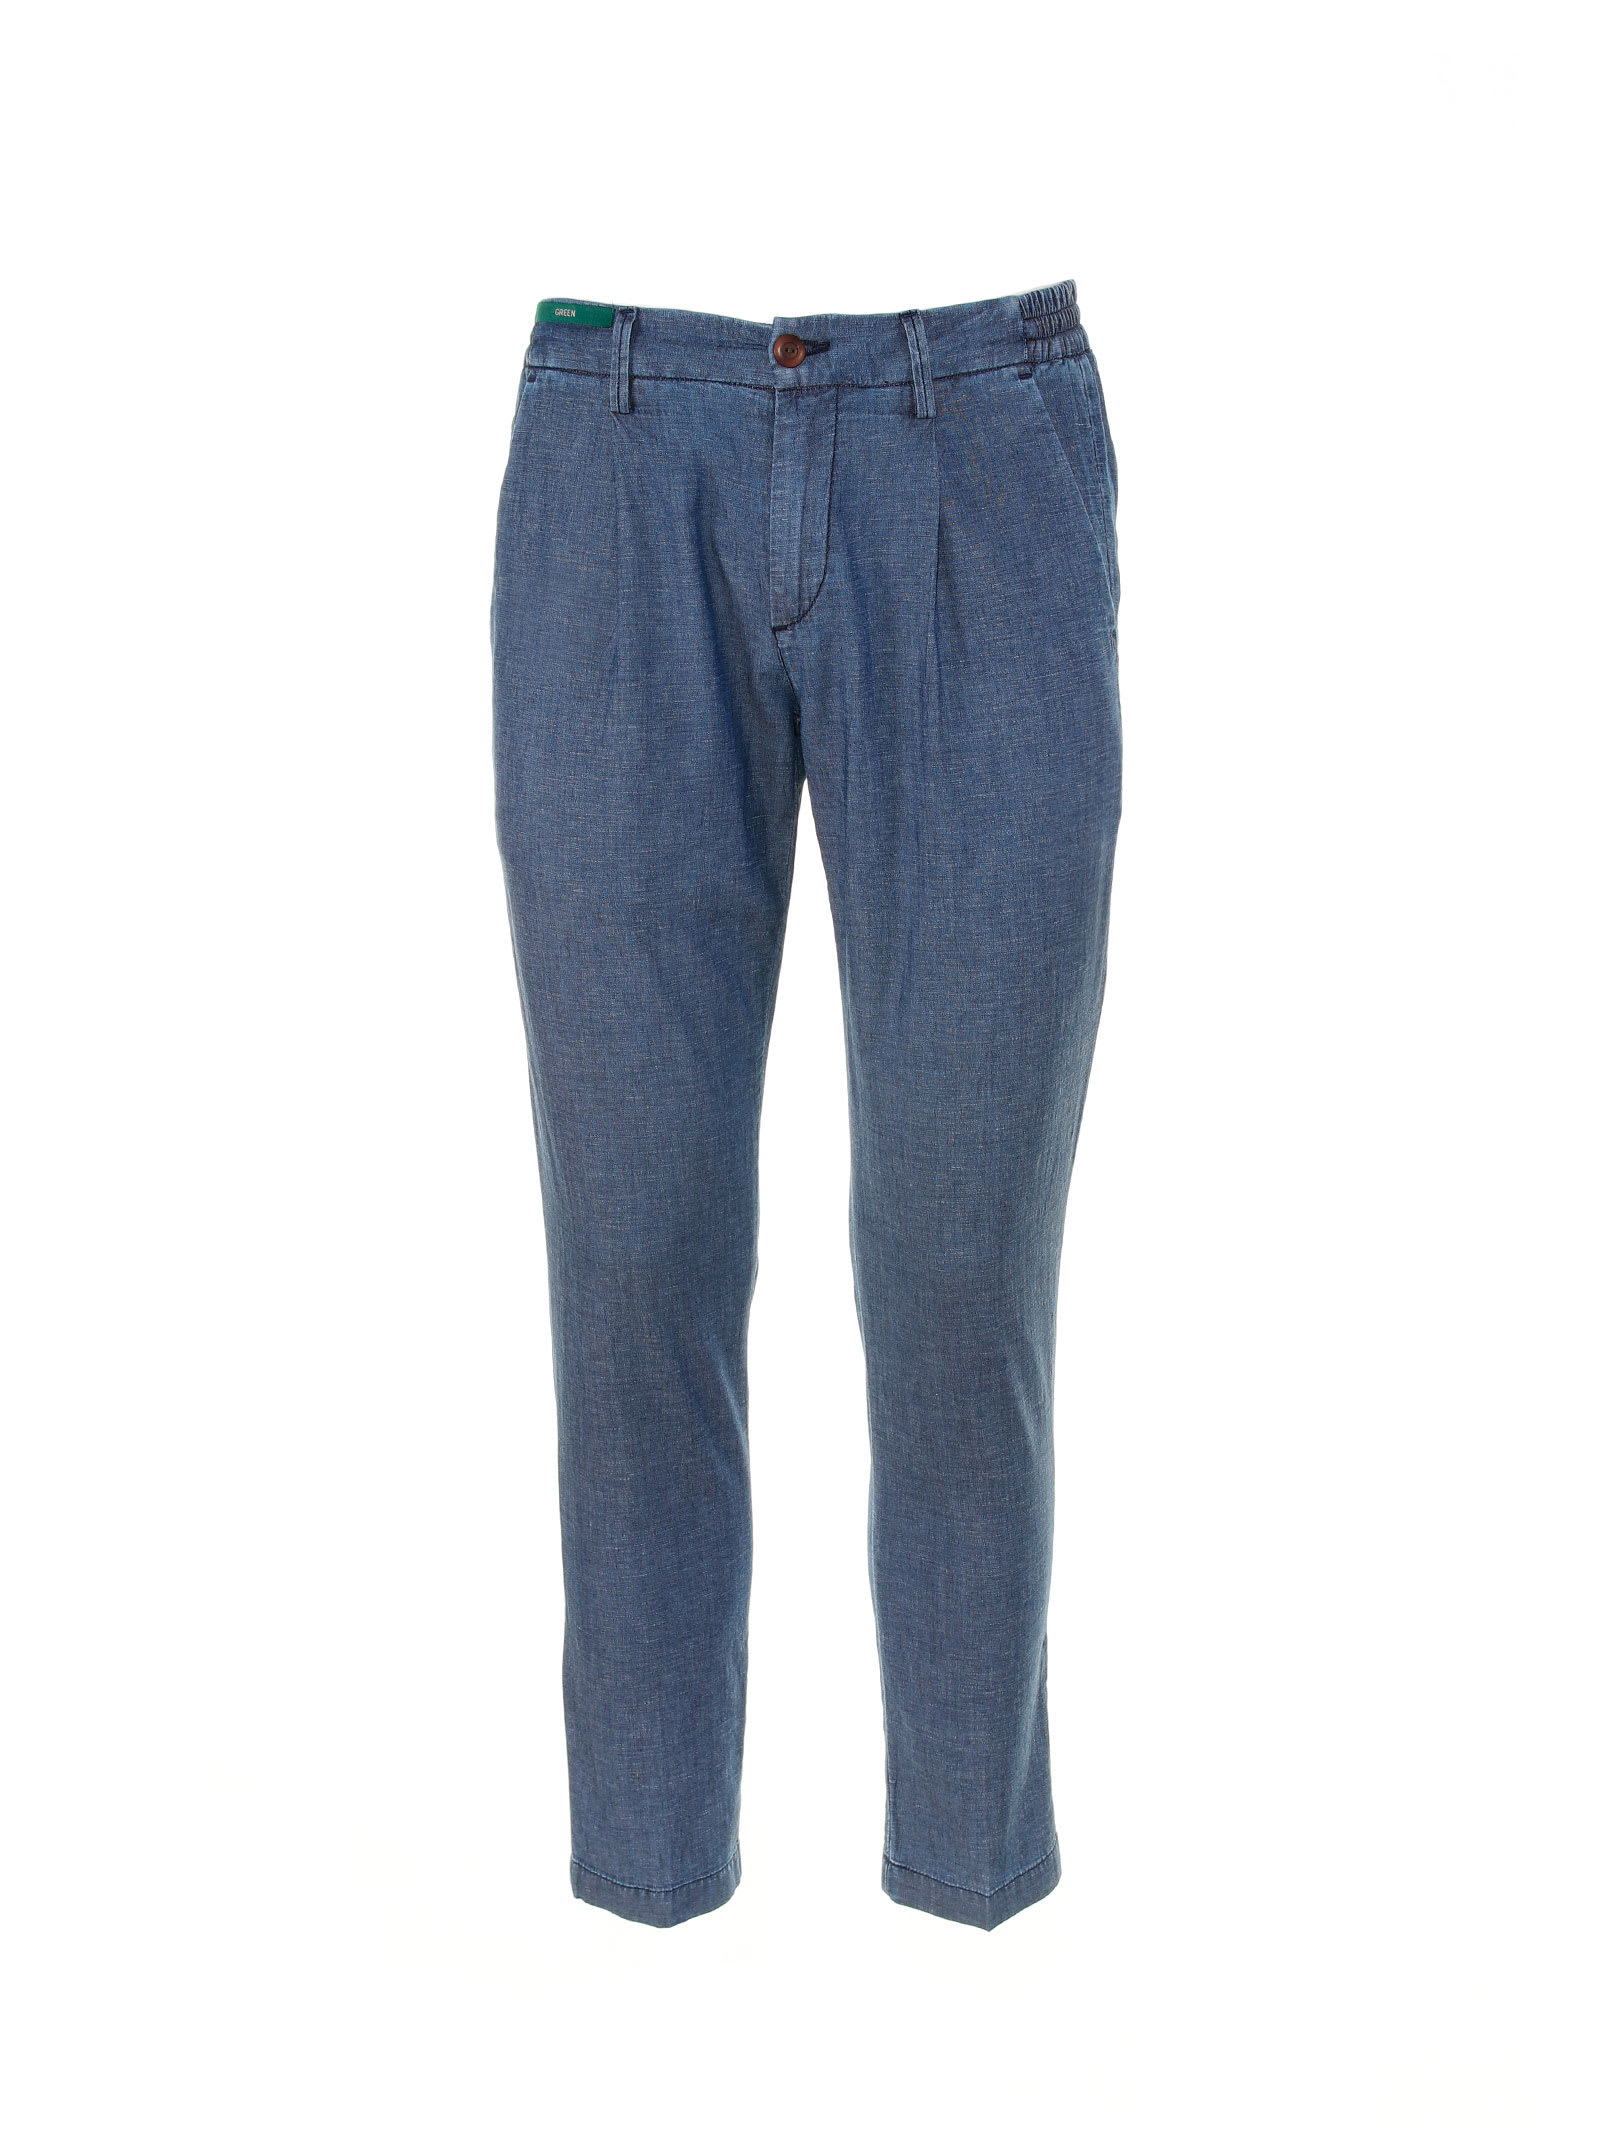 Re-HasH Jeans With Chino Pocket